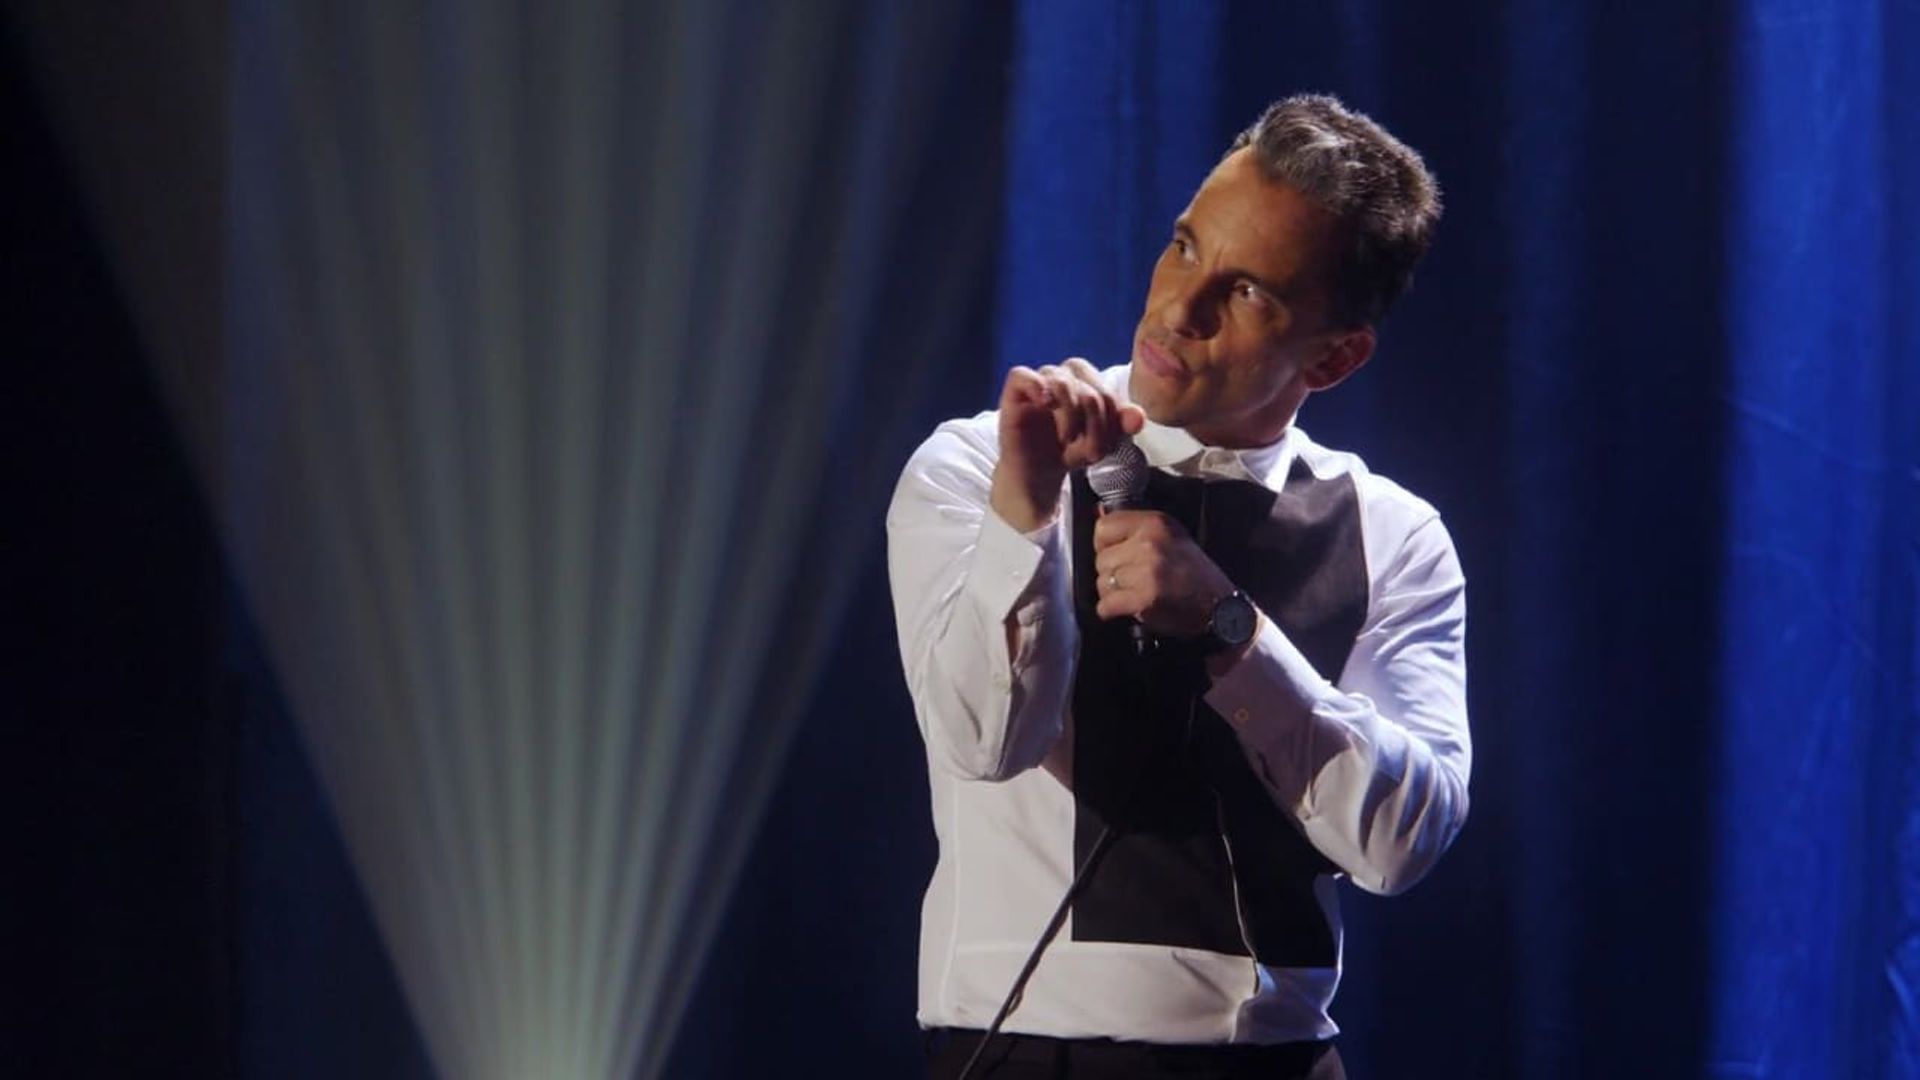 Sebastian Maniscalco: Why Would You Do That? background